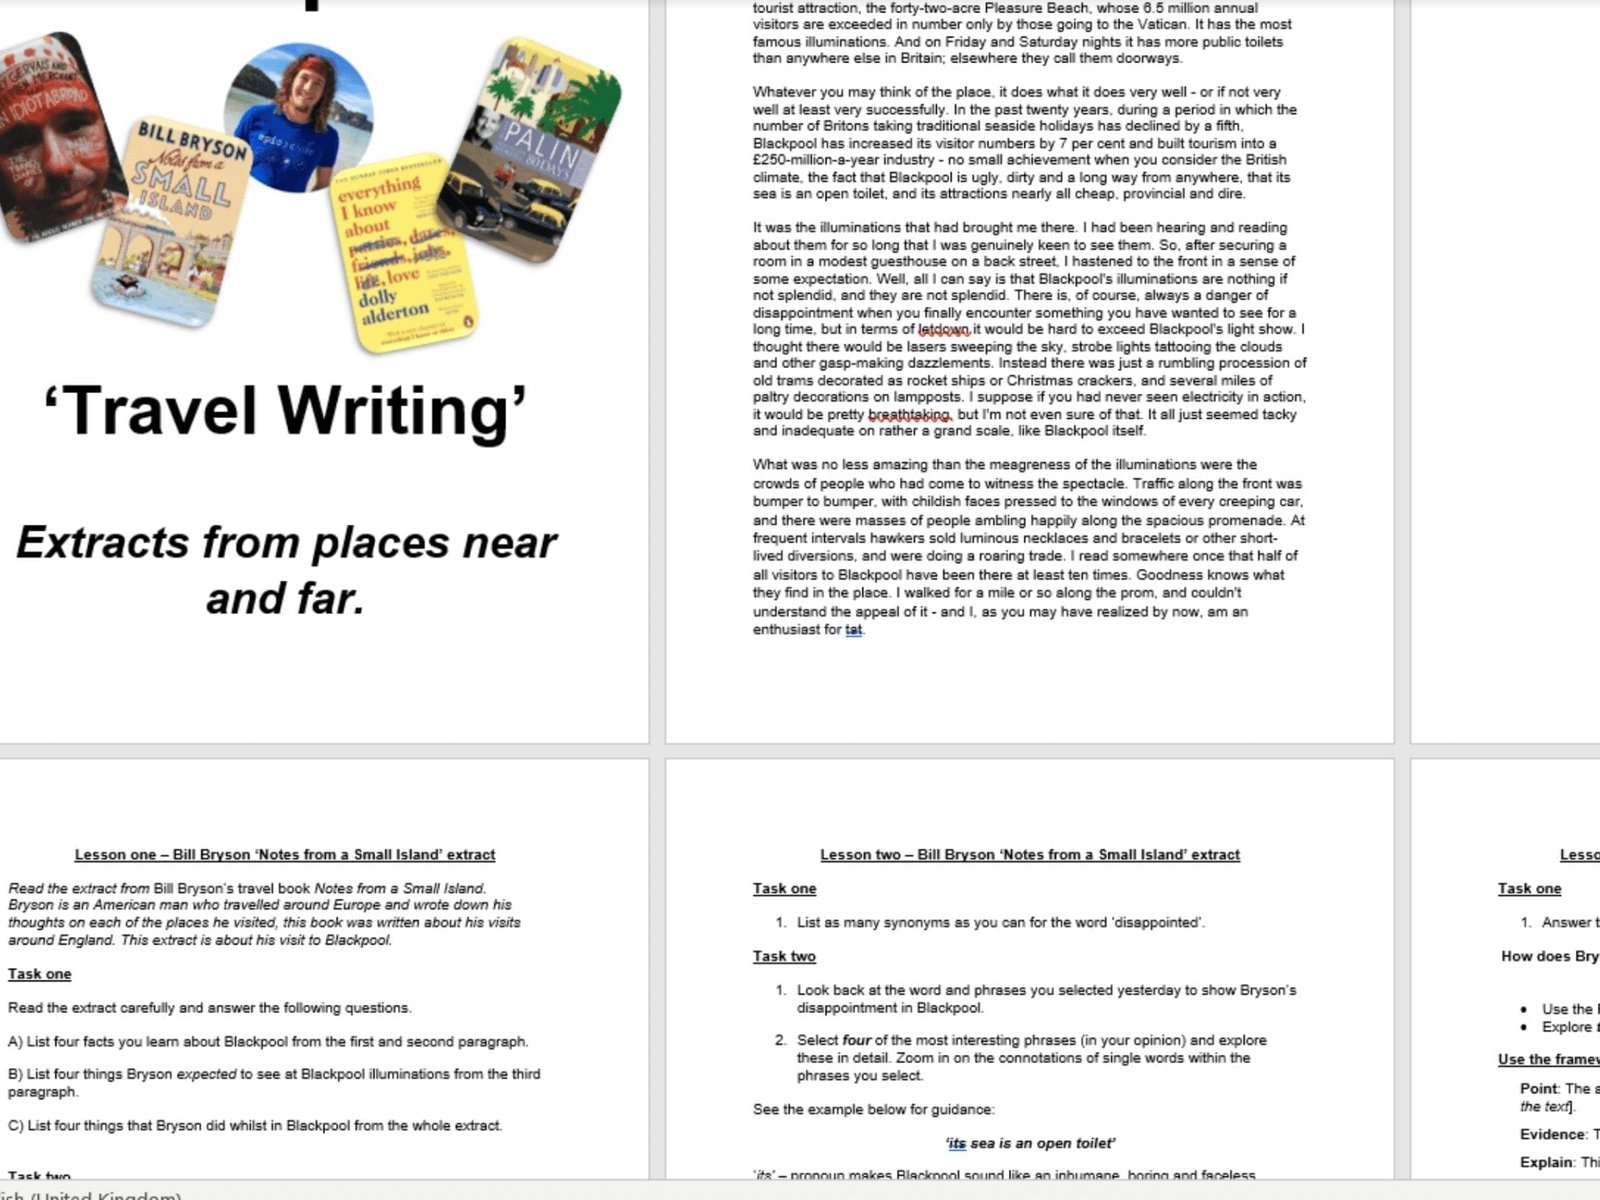 culture and travel writing task 2